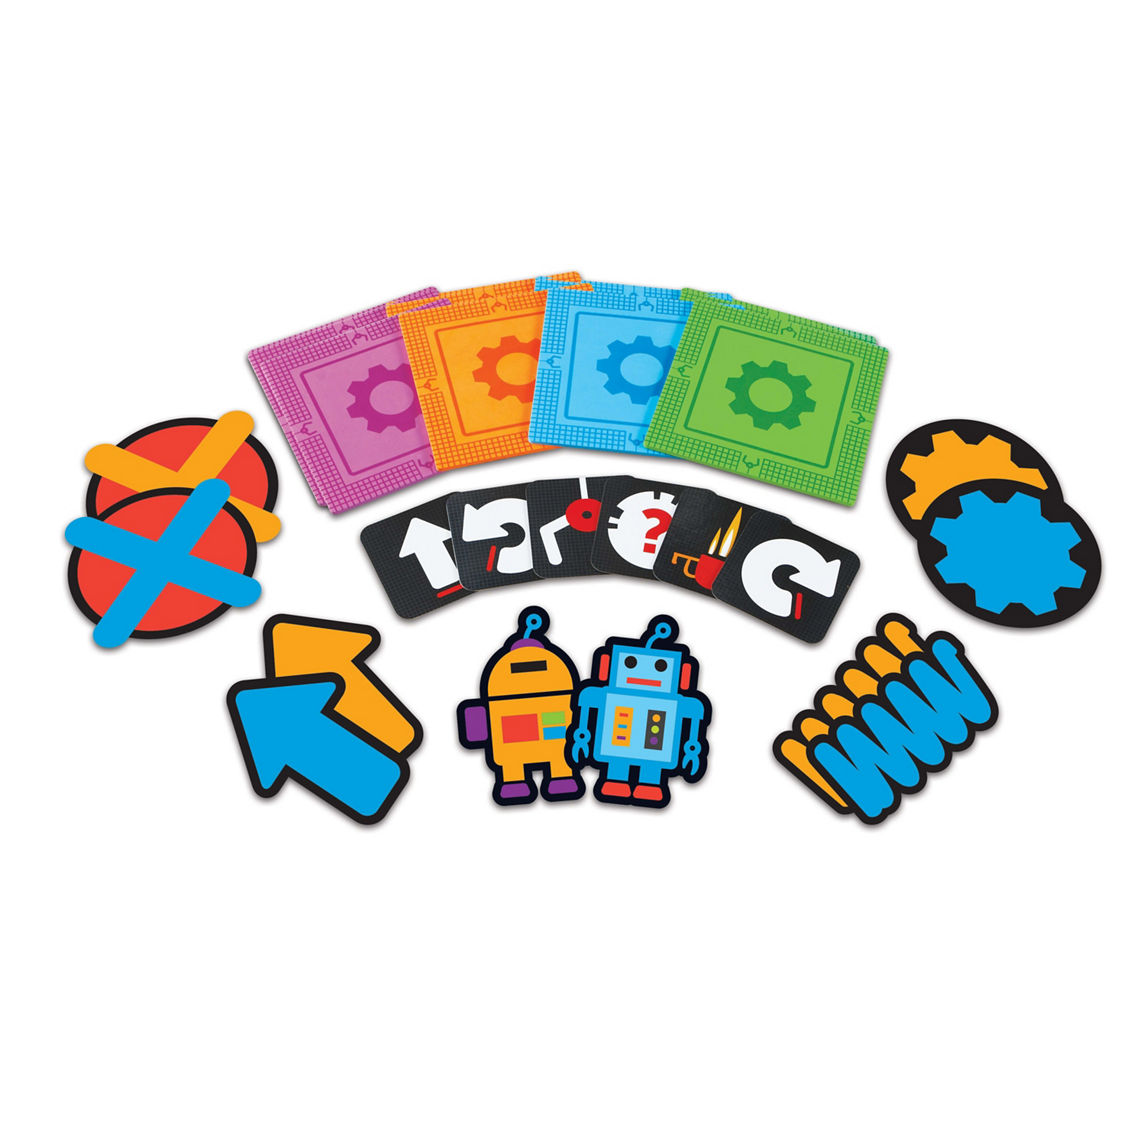 Learning Resources Learning Essentials - Let's Go Code! Activity Set - Image 2 of 5